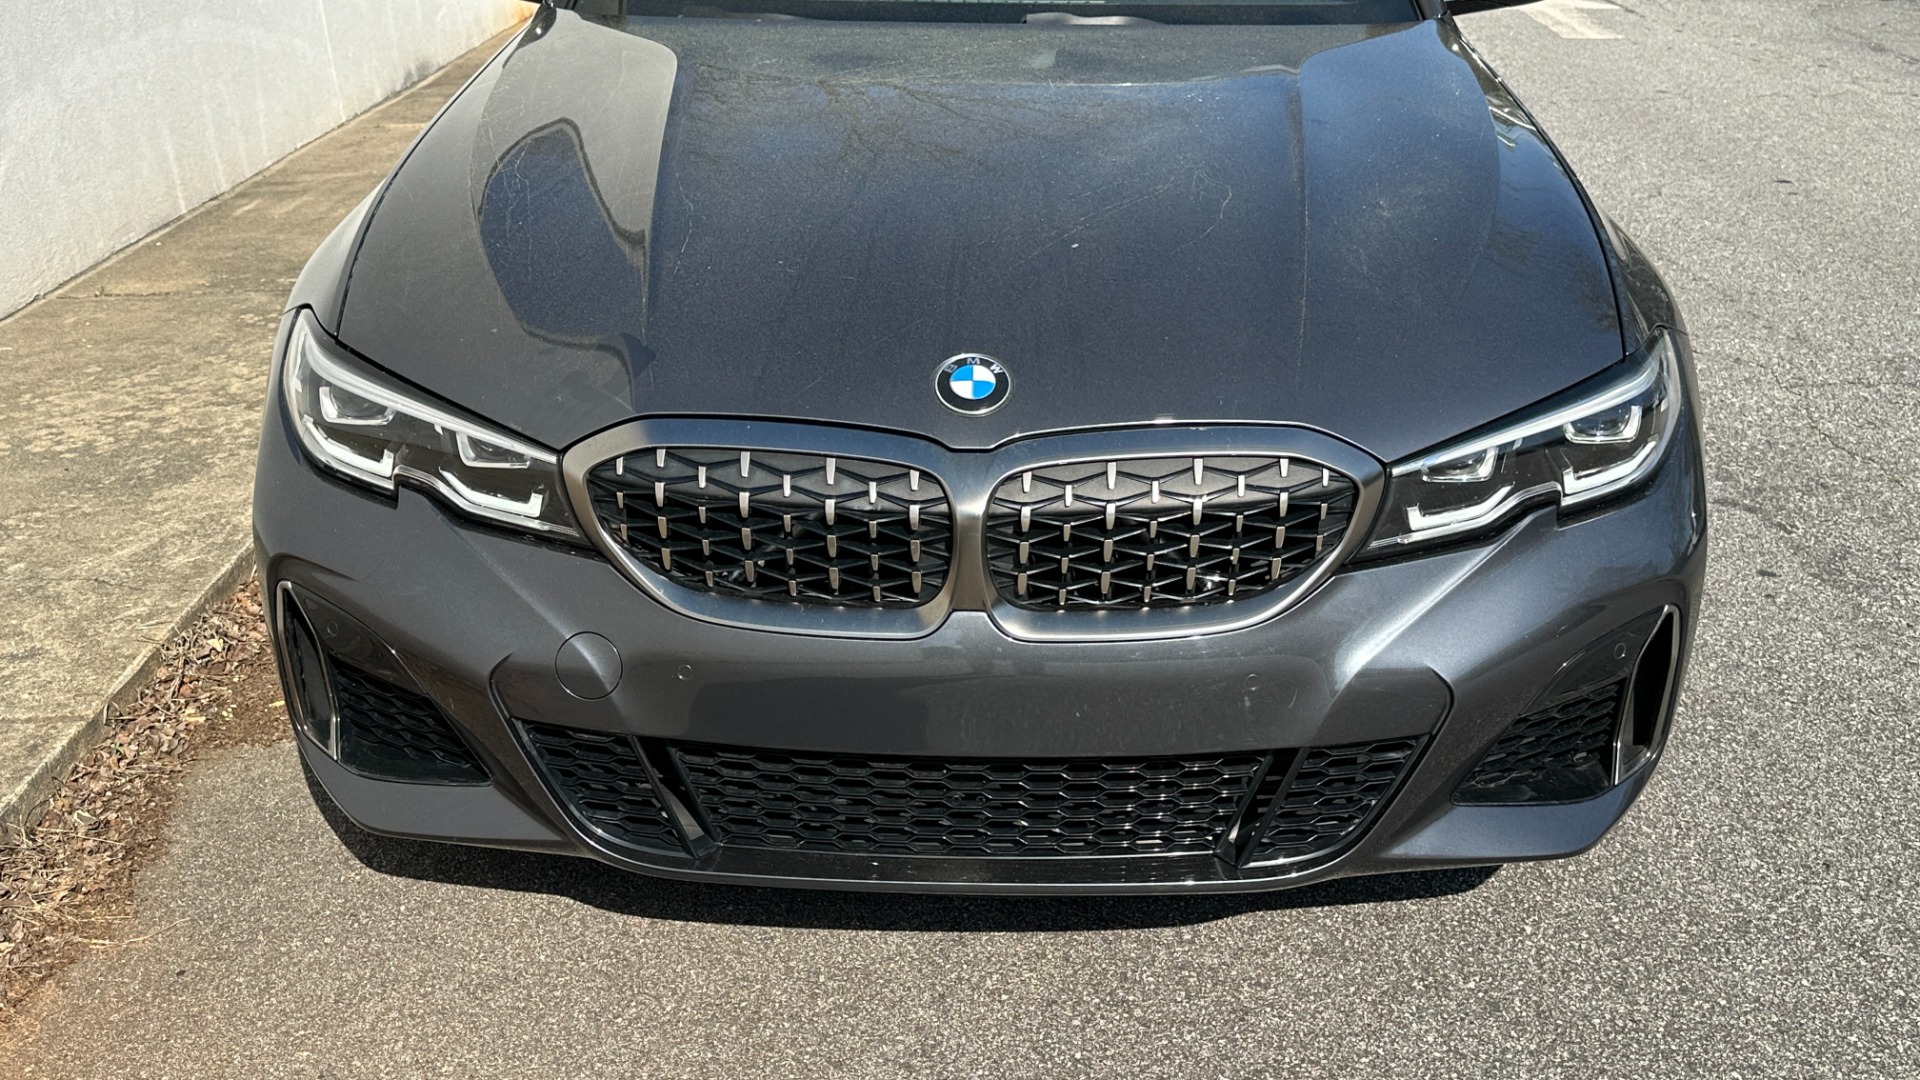 Used 2020 BMW 3 Series M340i / 19IN WHEELS / DRIVER ASSIST / HEATED SEATS / PARKING SENSORS for sale $45,995 at Formula Imports in Charlotte NC 28227 9